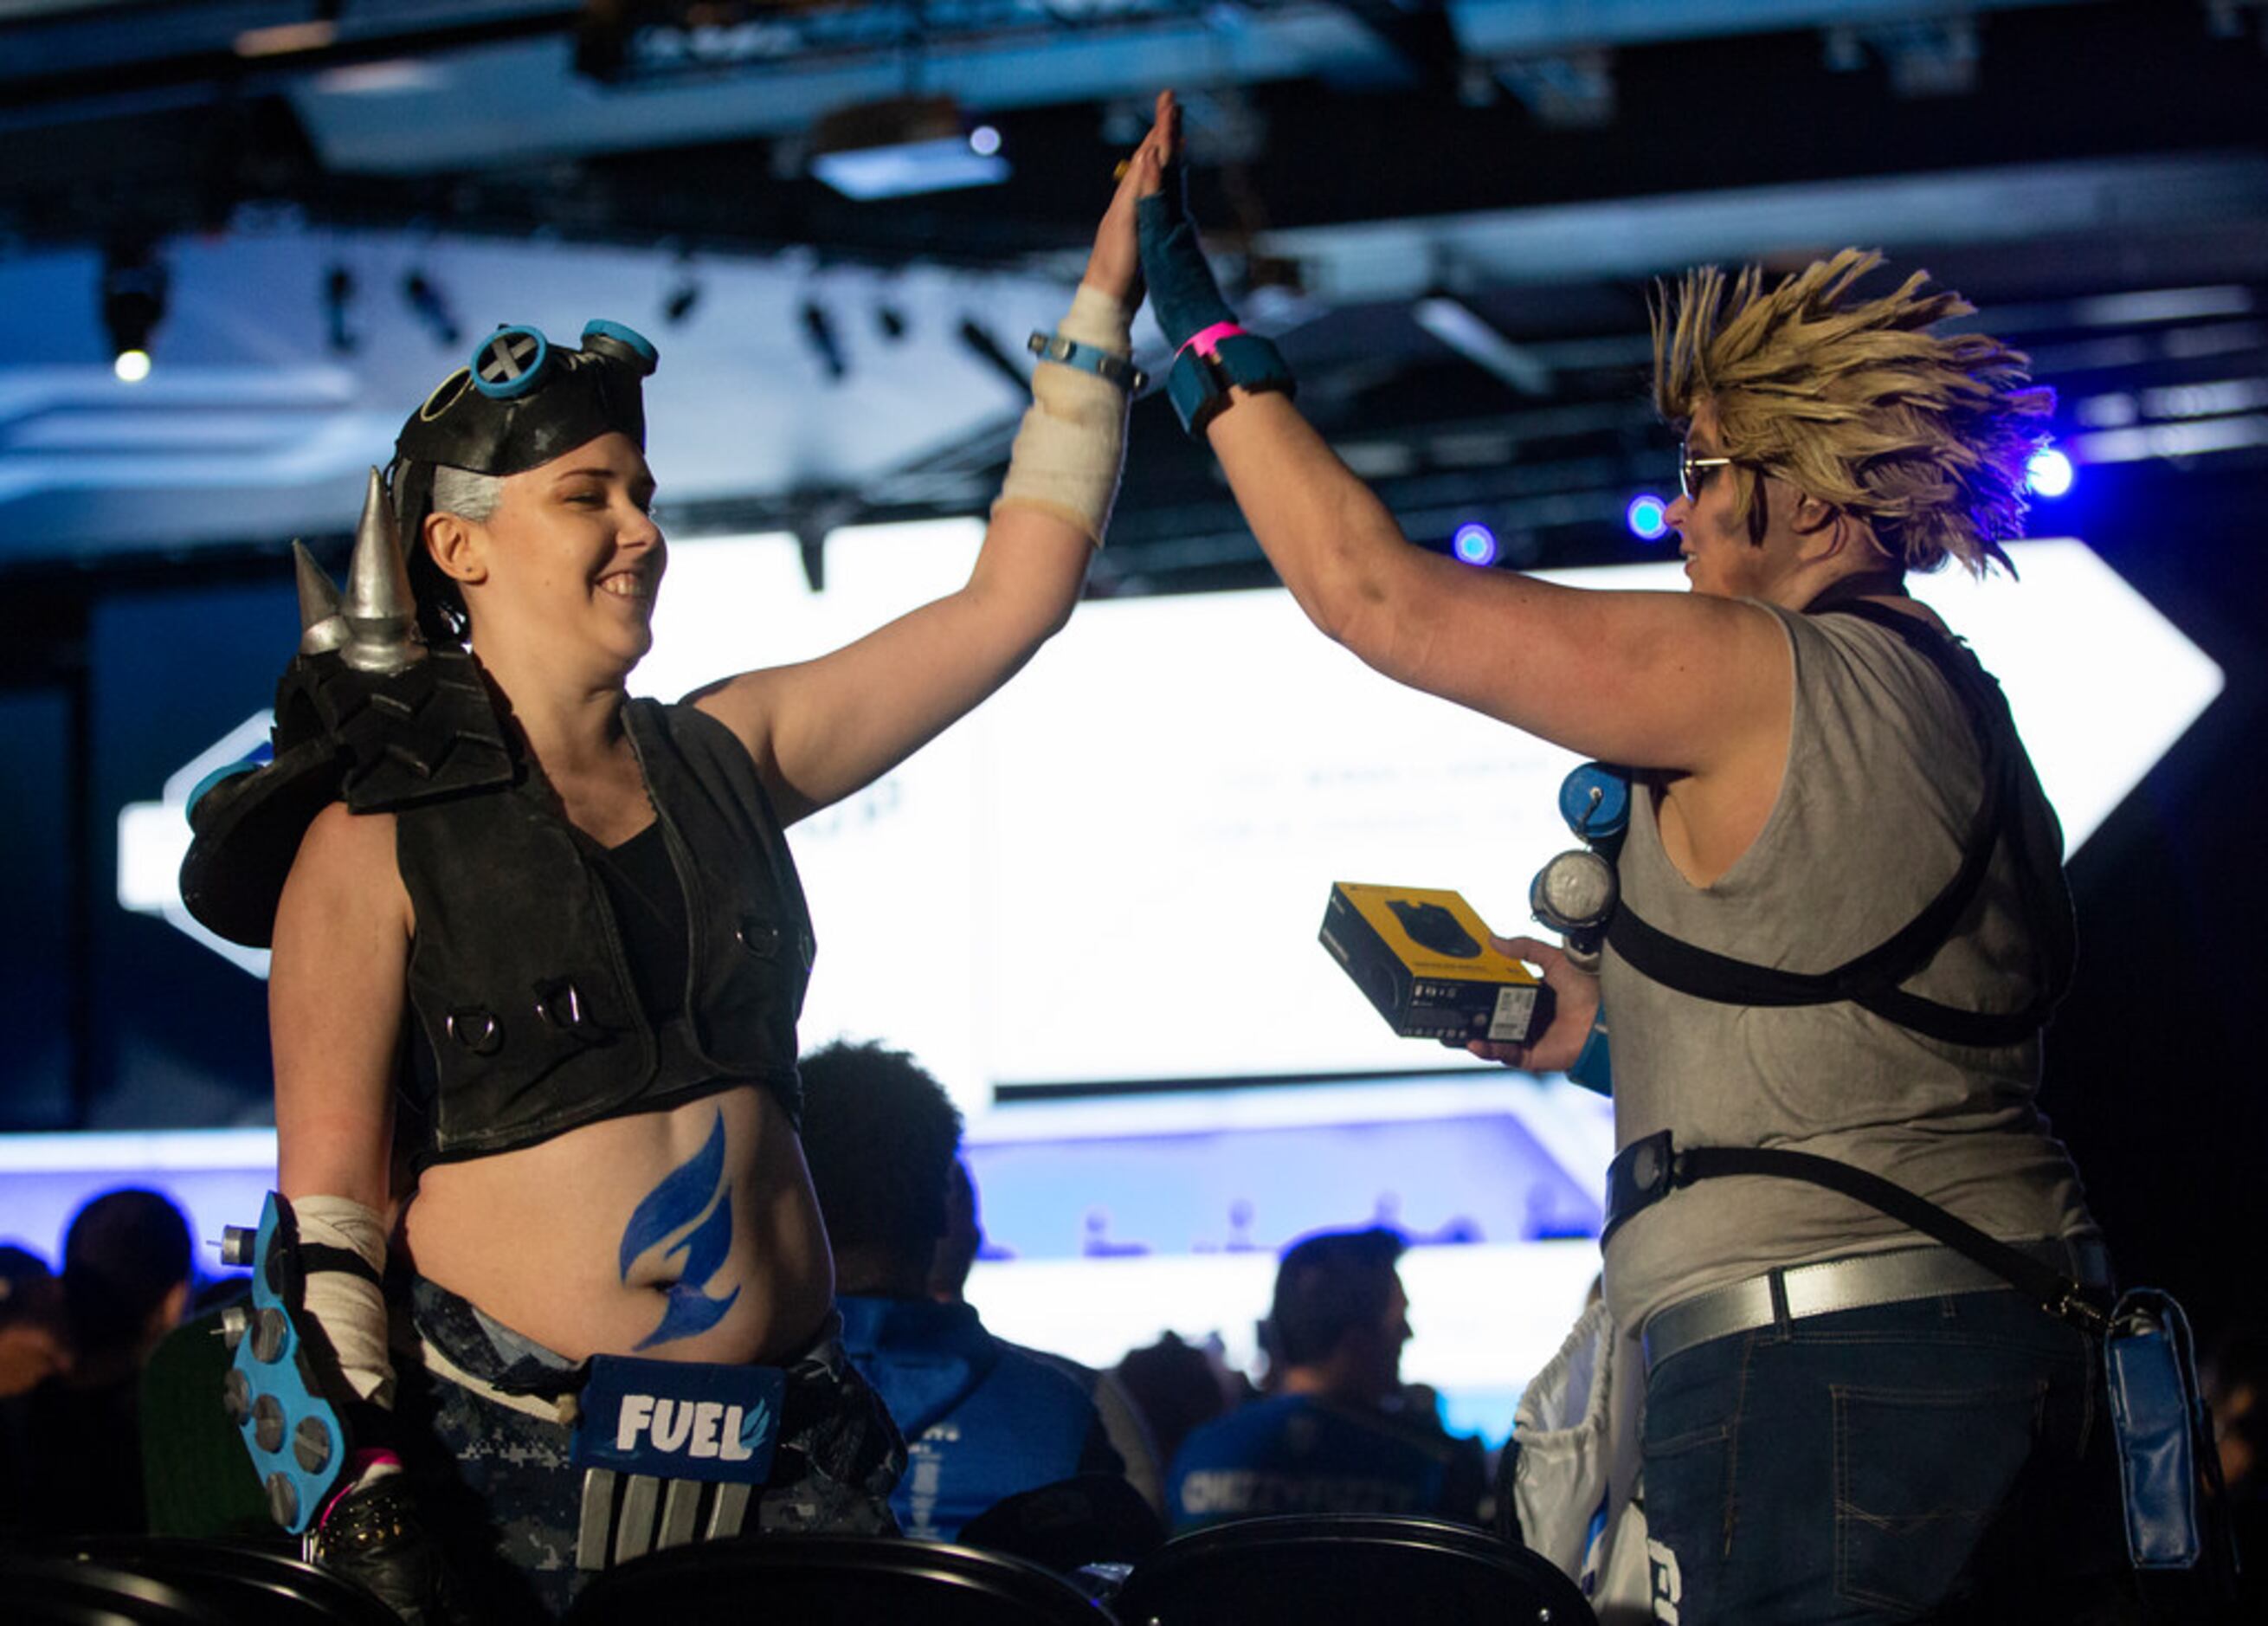 Sisters Kas and Kat Bradley from Dallas wear costumes inspired by the The Dallas Fuel during...